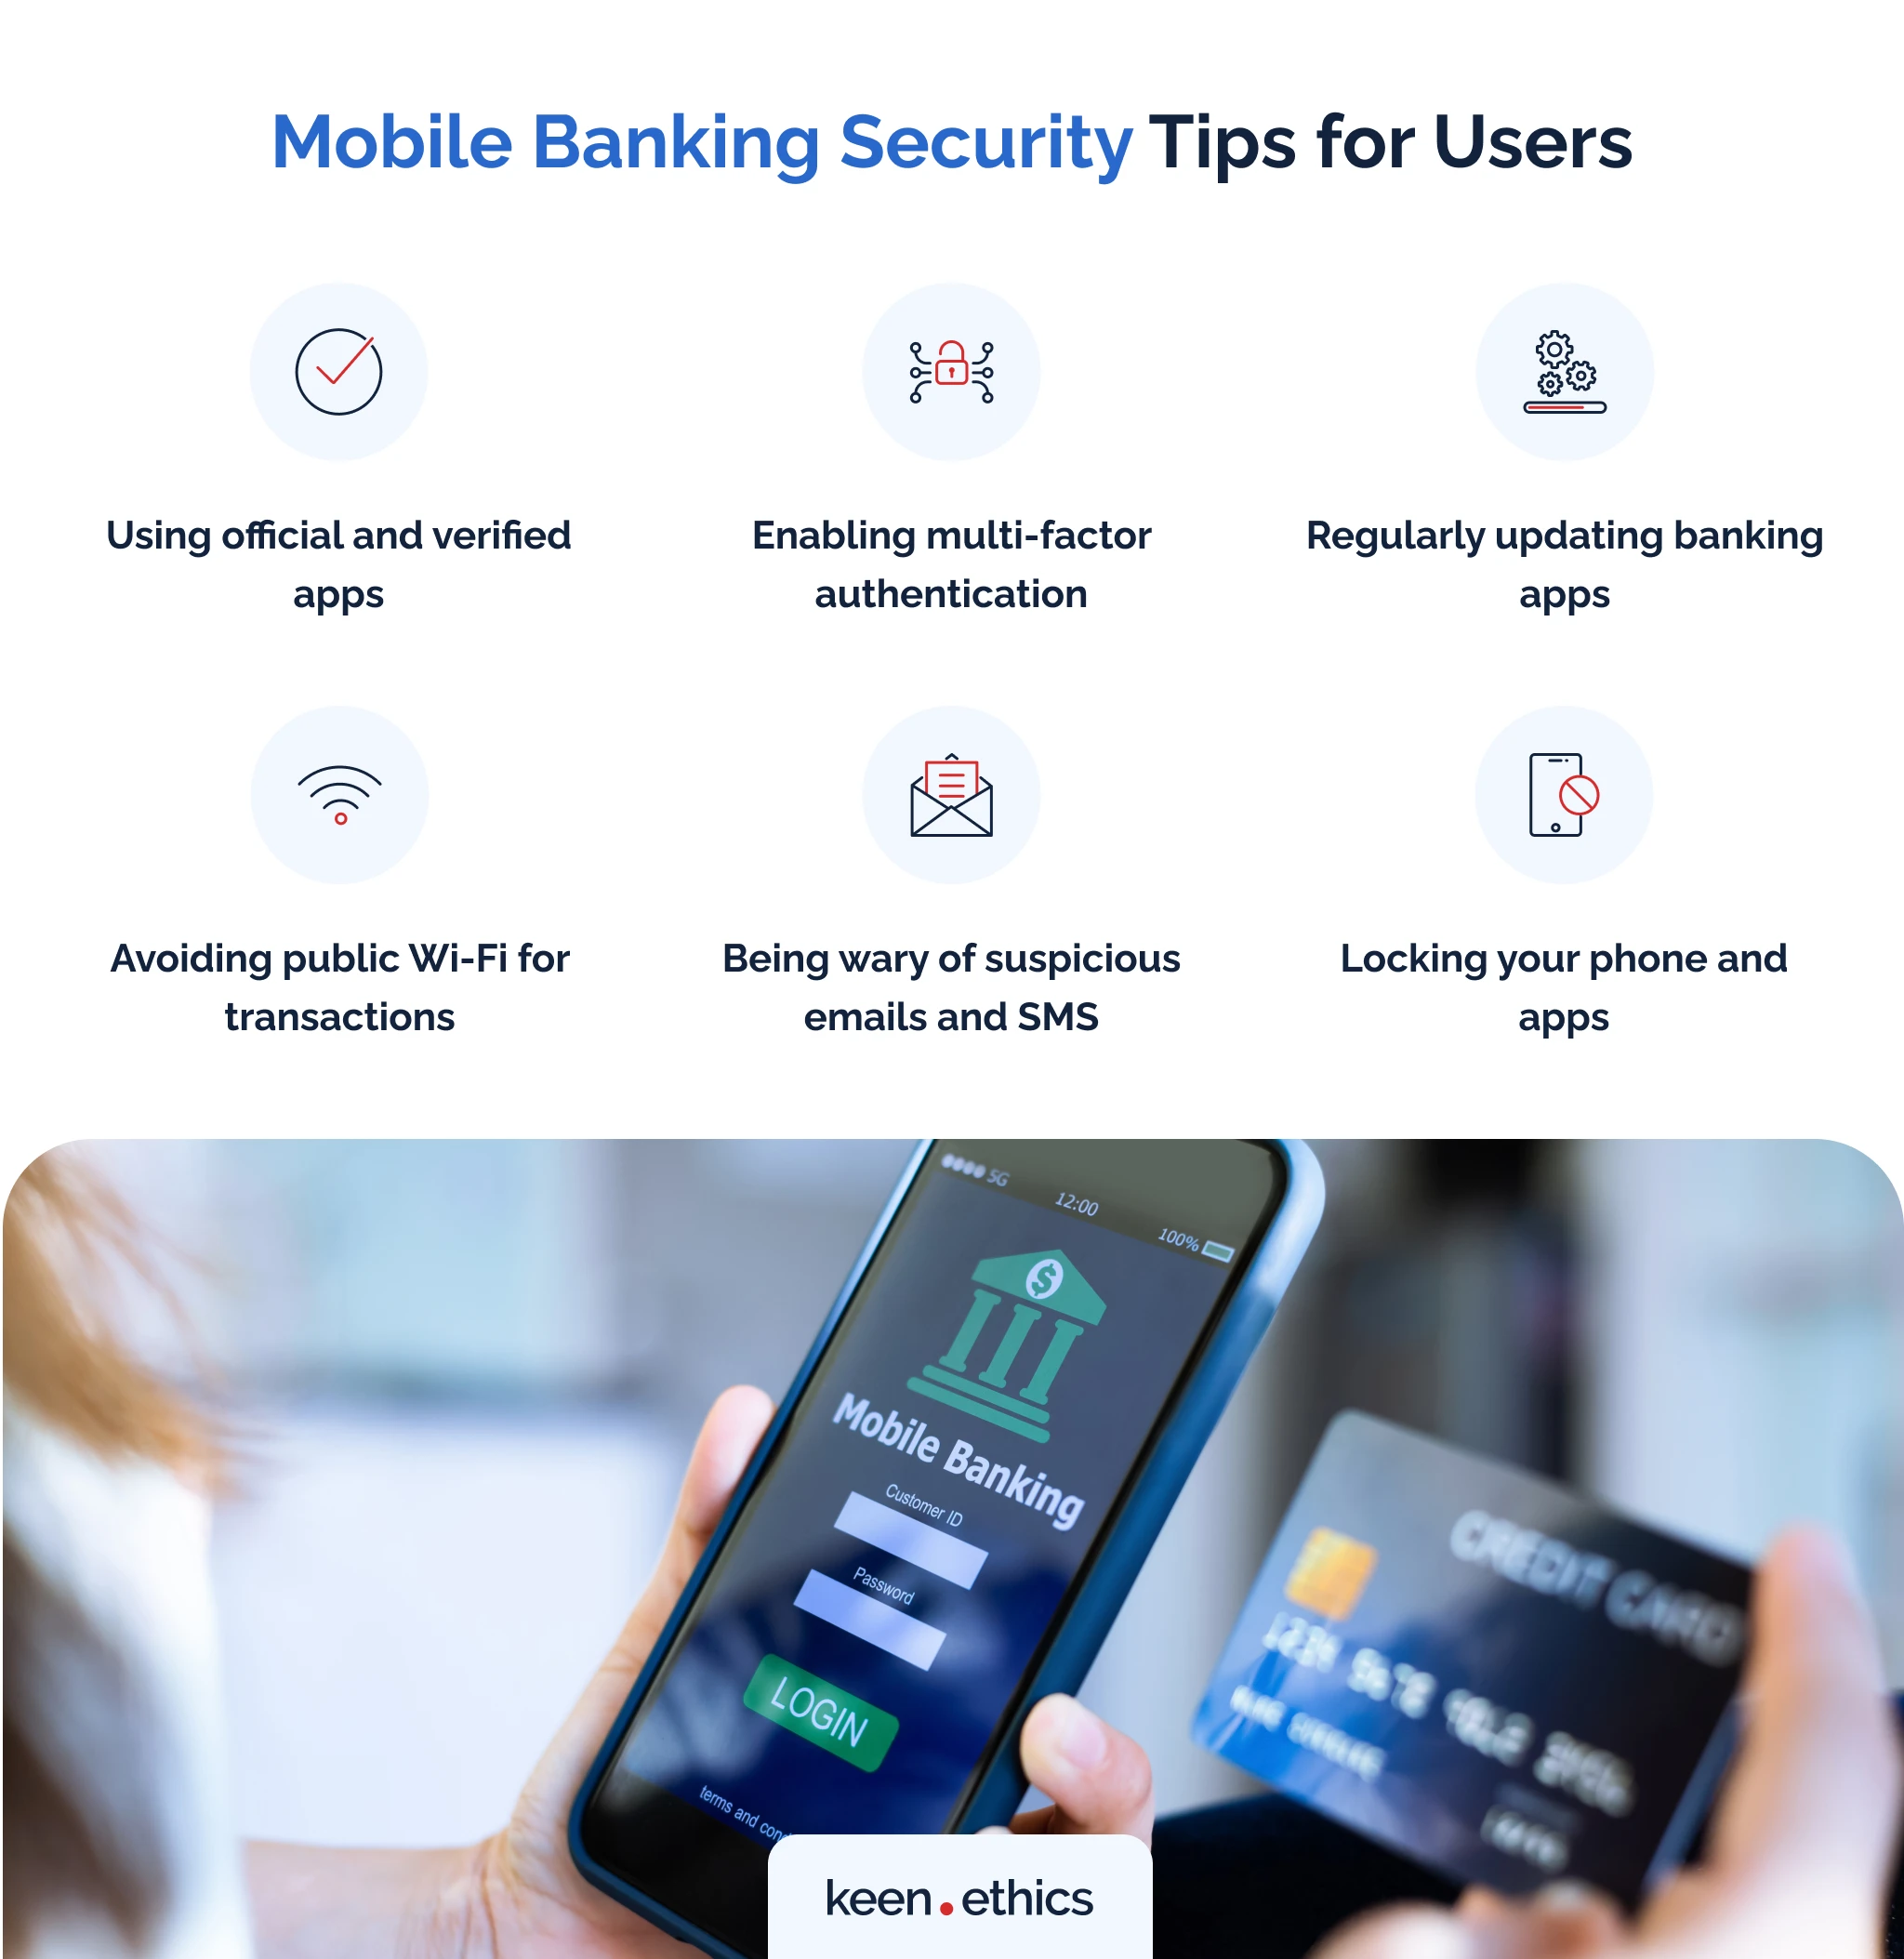 Mobile banking security tips for users